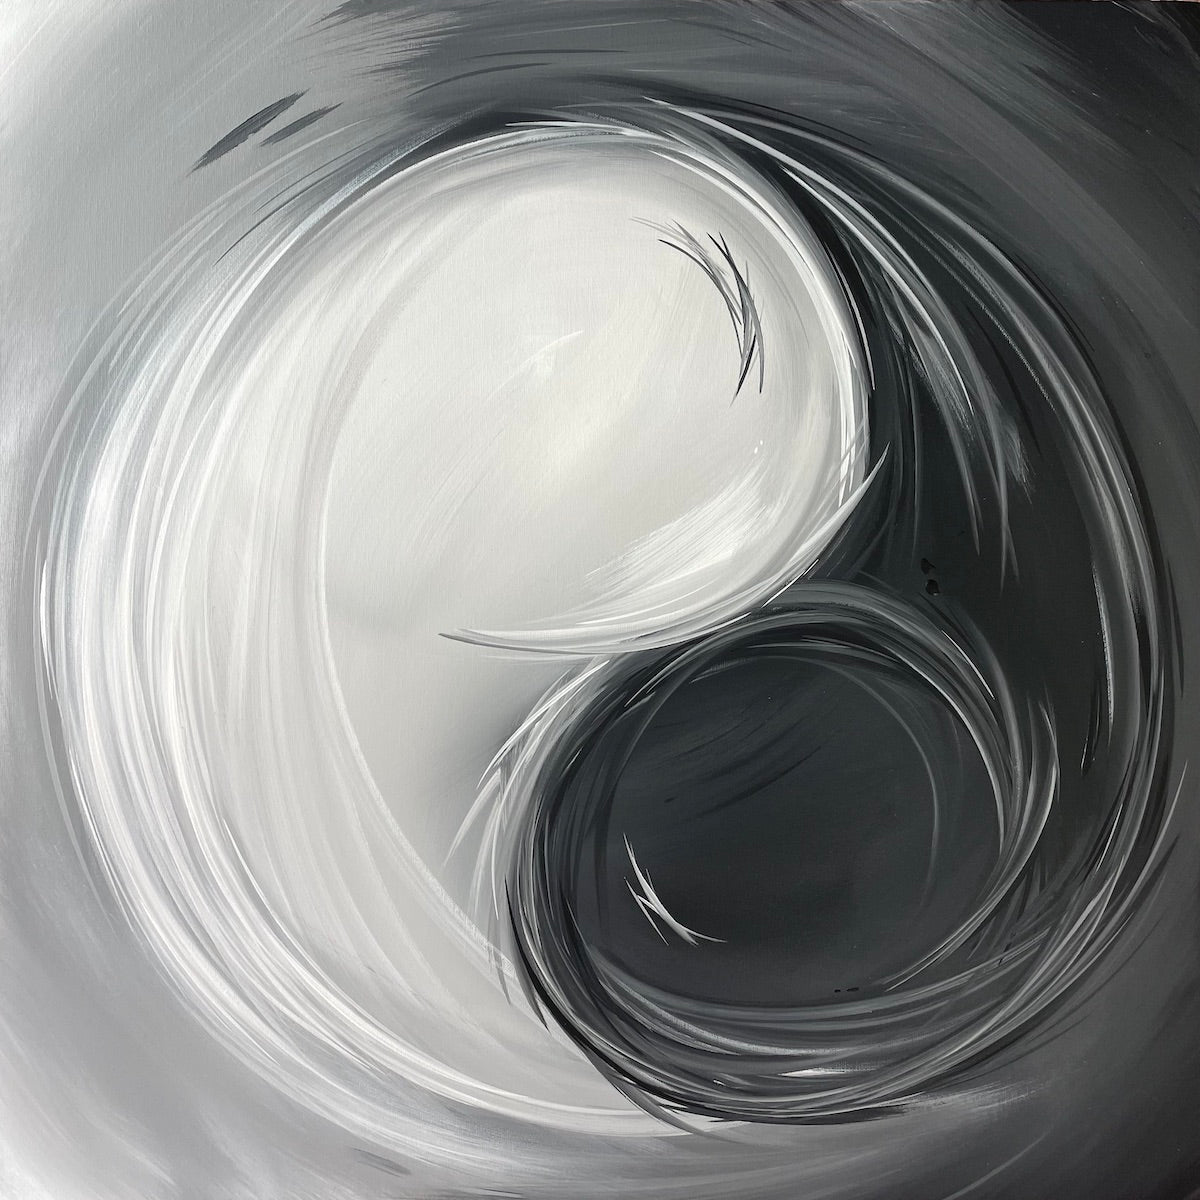 black and white abstract art by contemporary artist Michael Carini